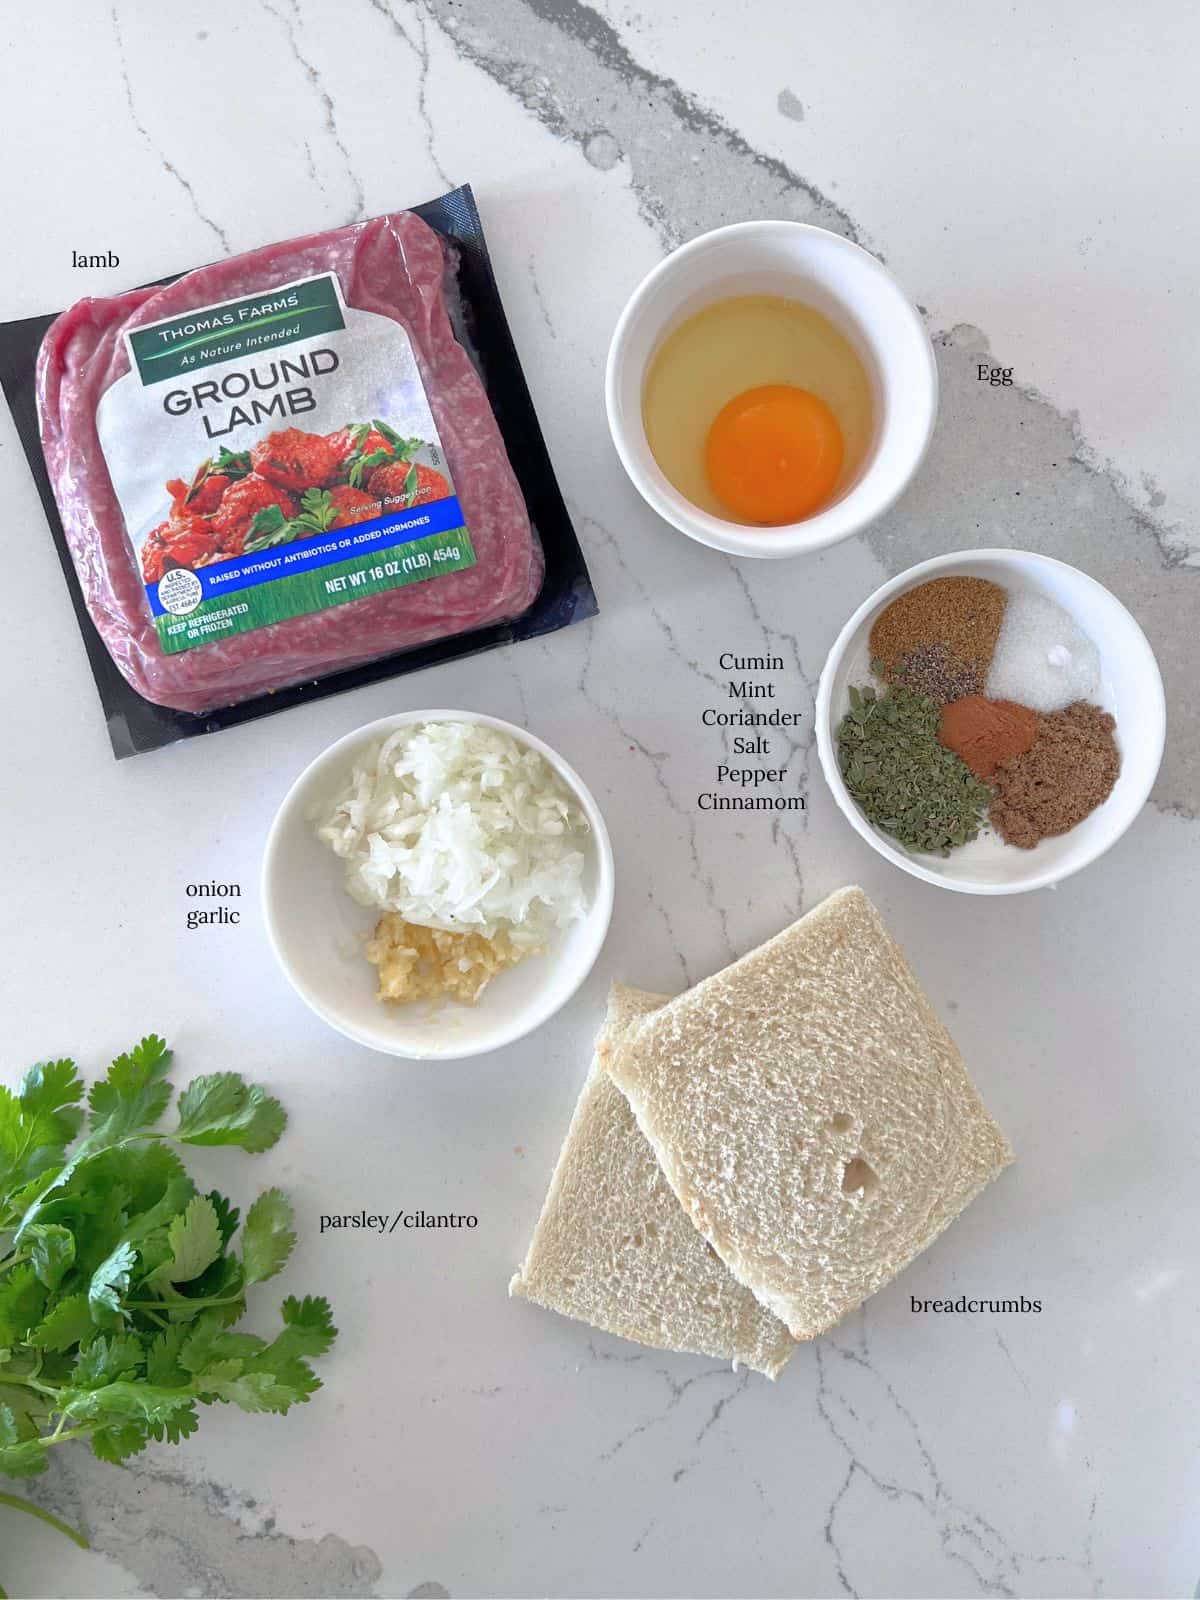 Ingredients to make lamb meatballs on table.